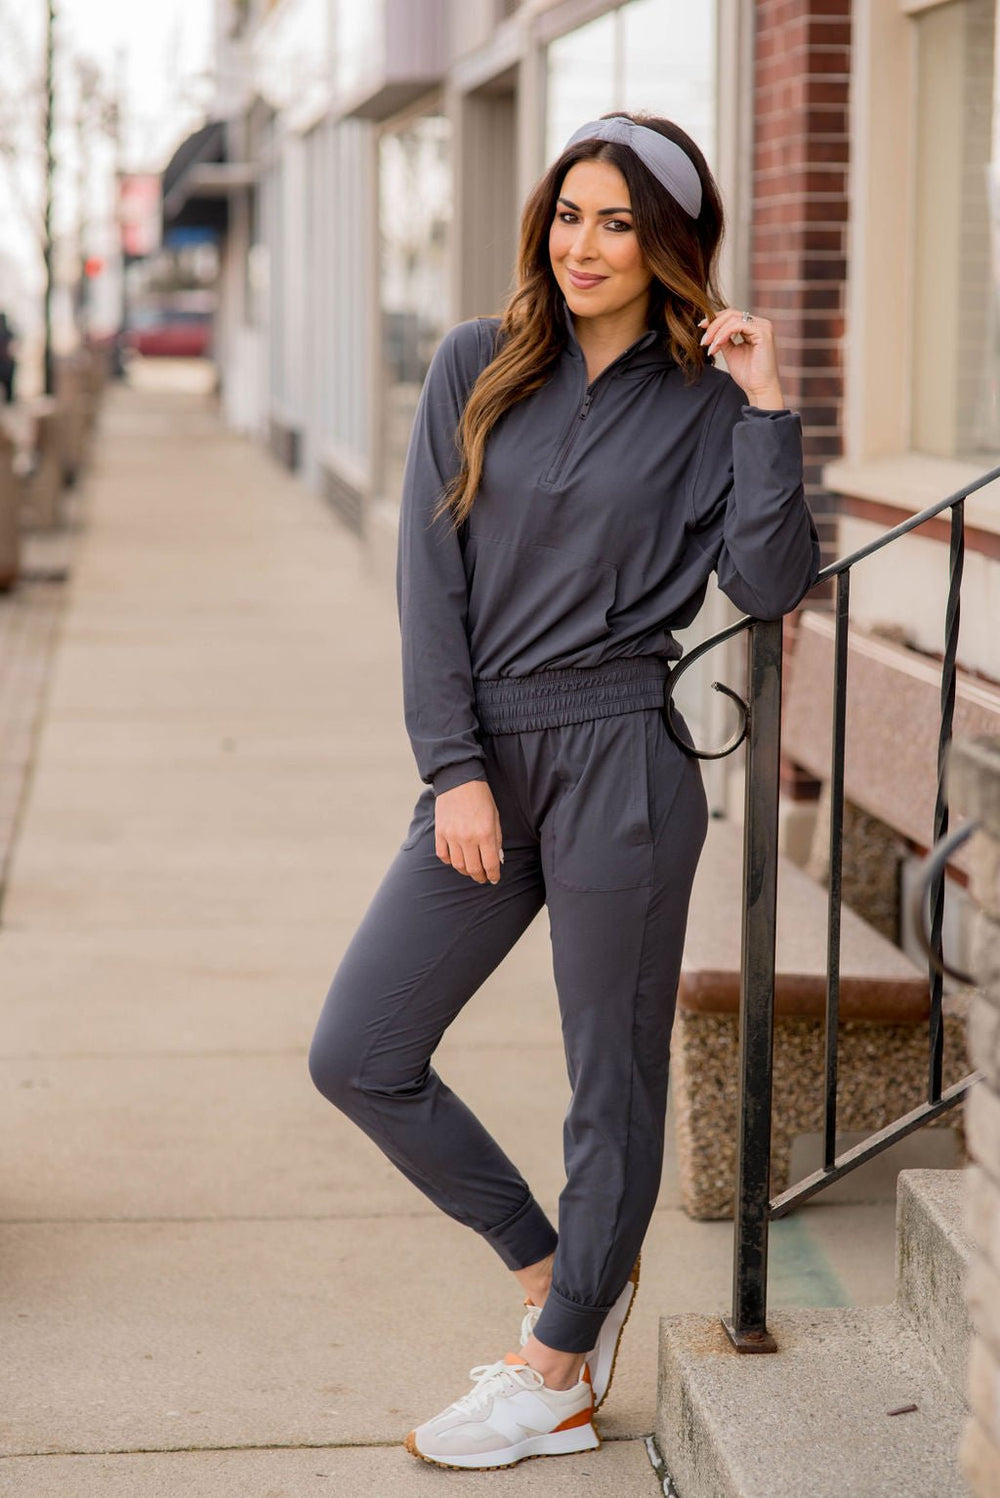 Darsey Butter Soft Jogger – Respectfully Dressed